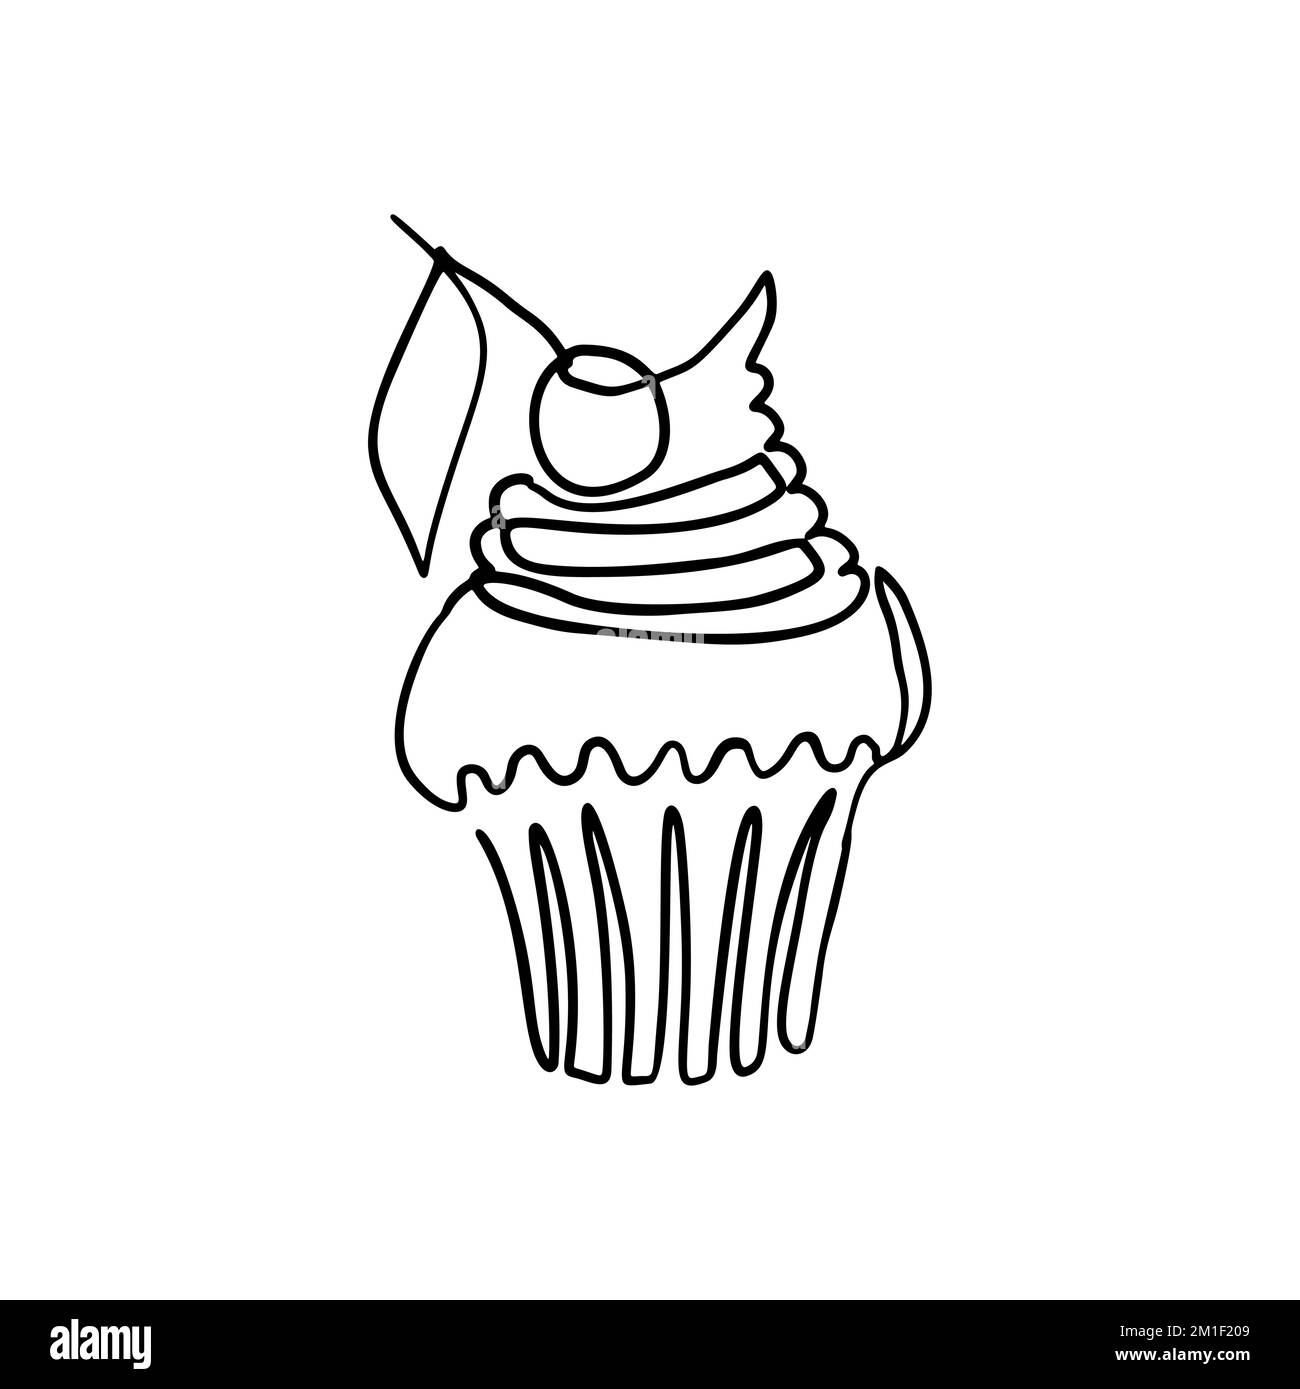 How to Draw a Birthday Cupcake Easy - YouTube